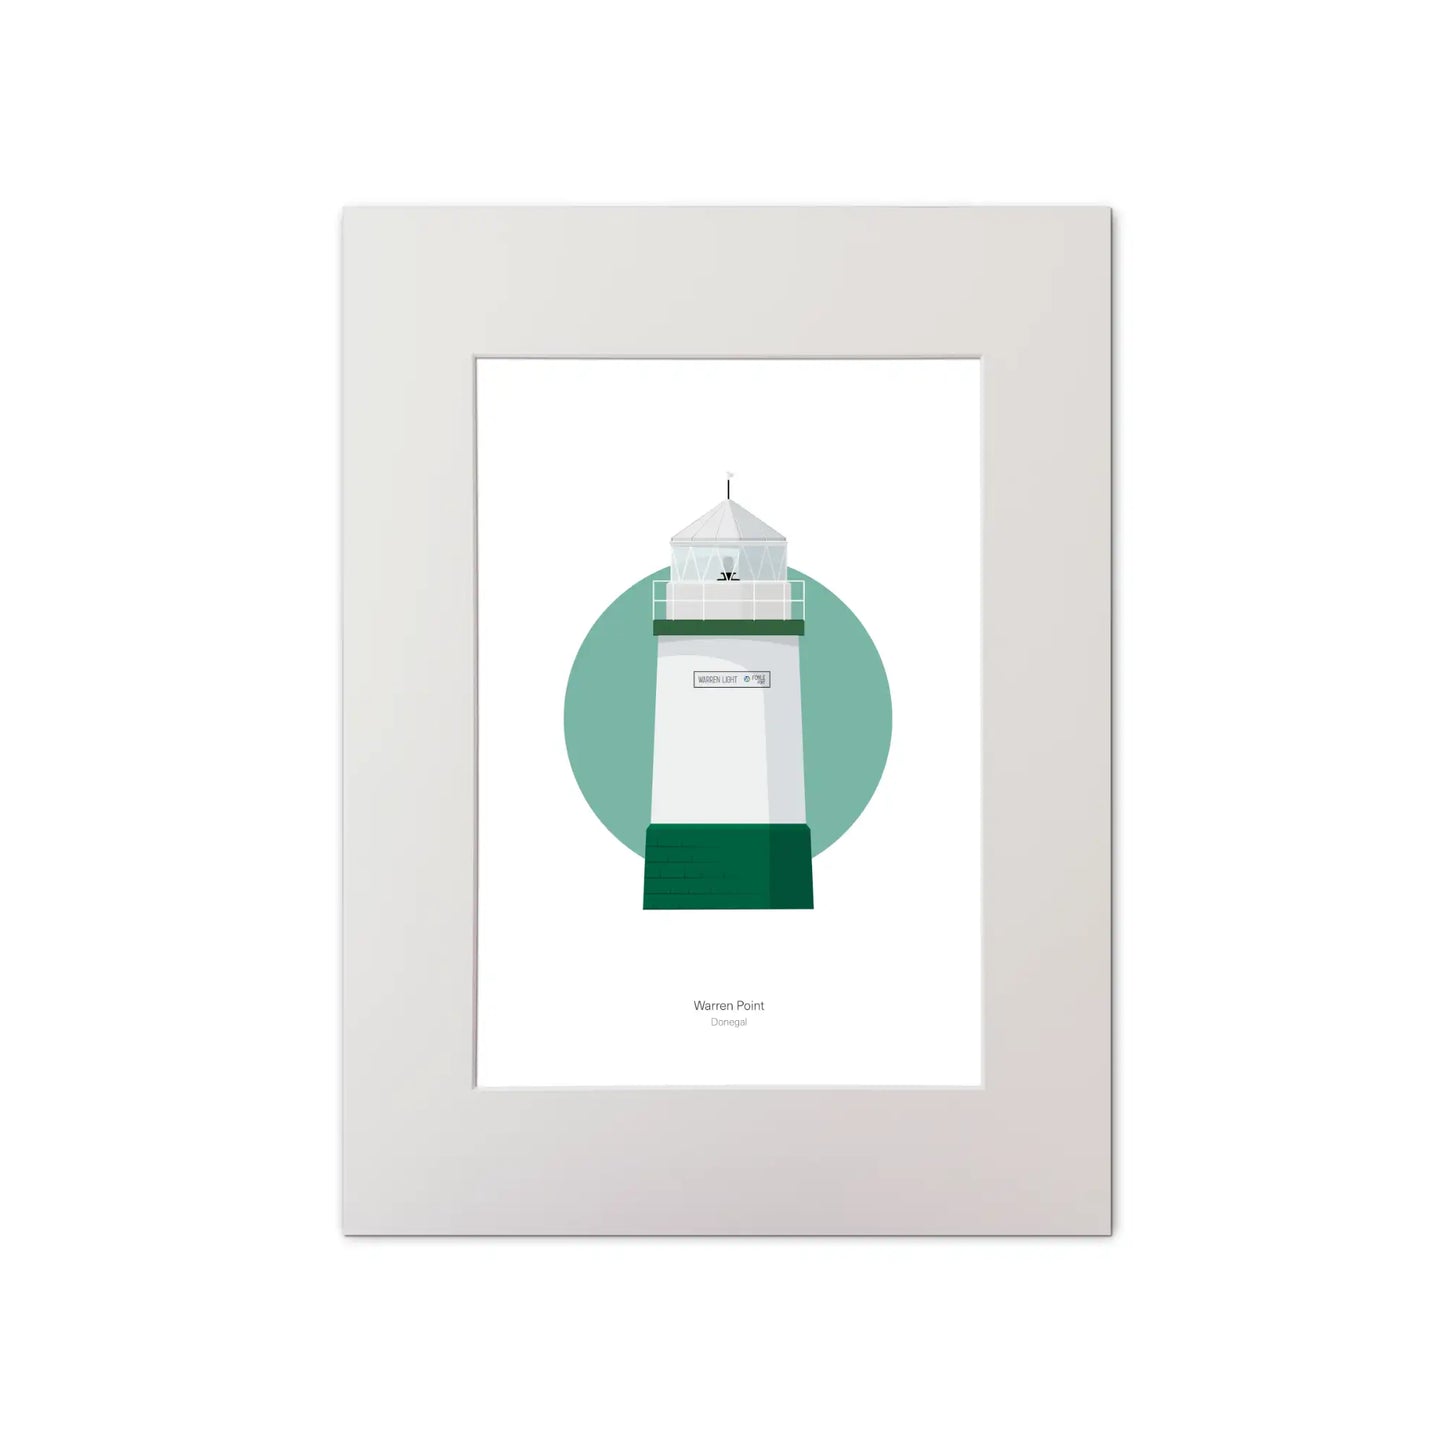 Contemporary graphic illustration of Warren Point lighthouse on a white background inside light blue square, mounted and measuring 30x40cm.